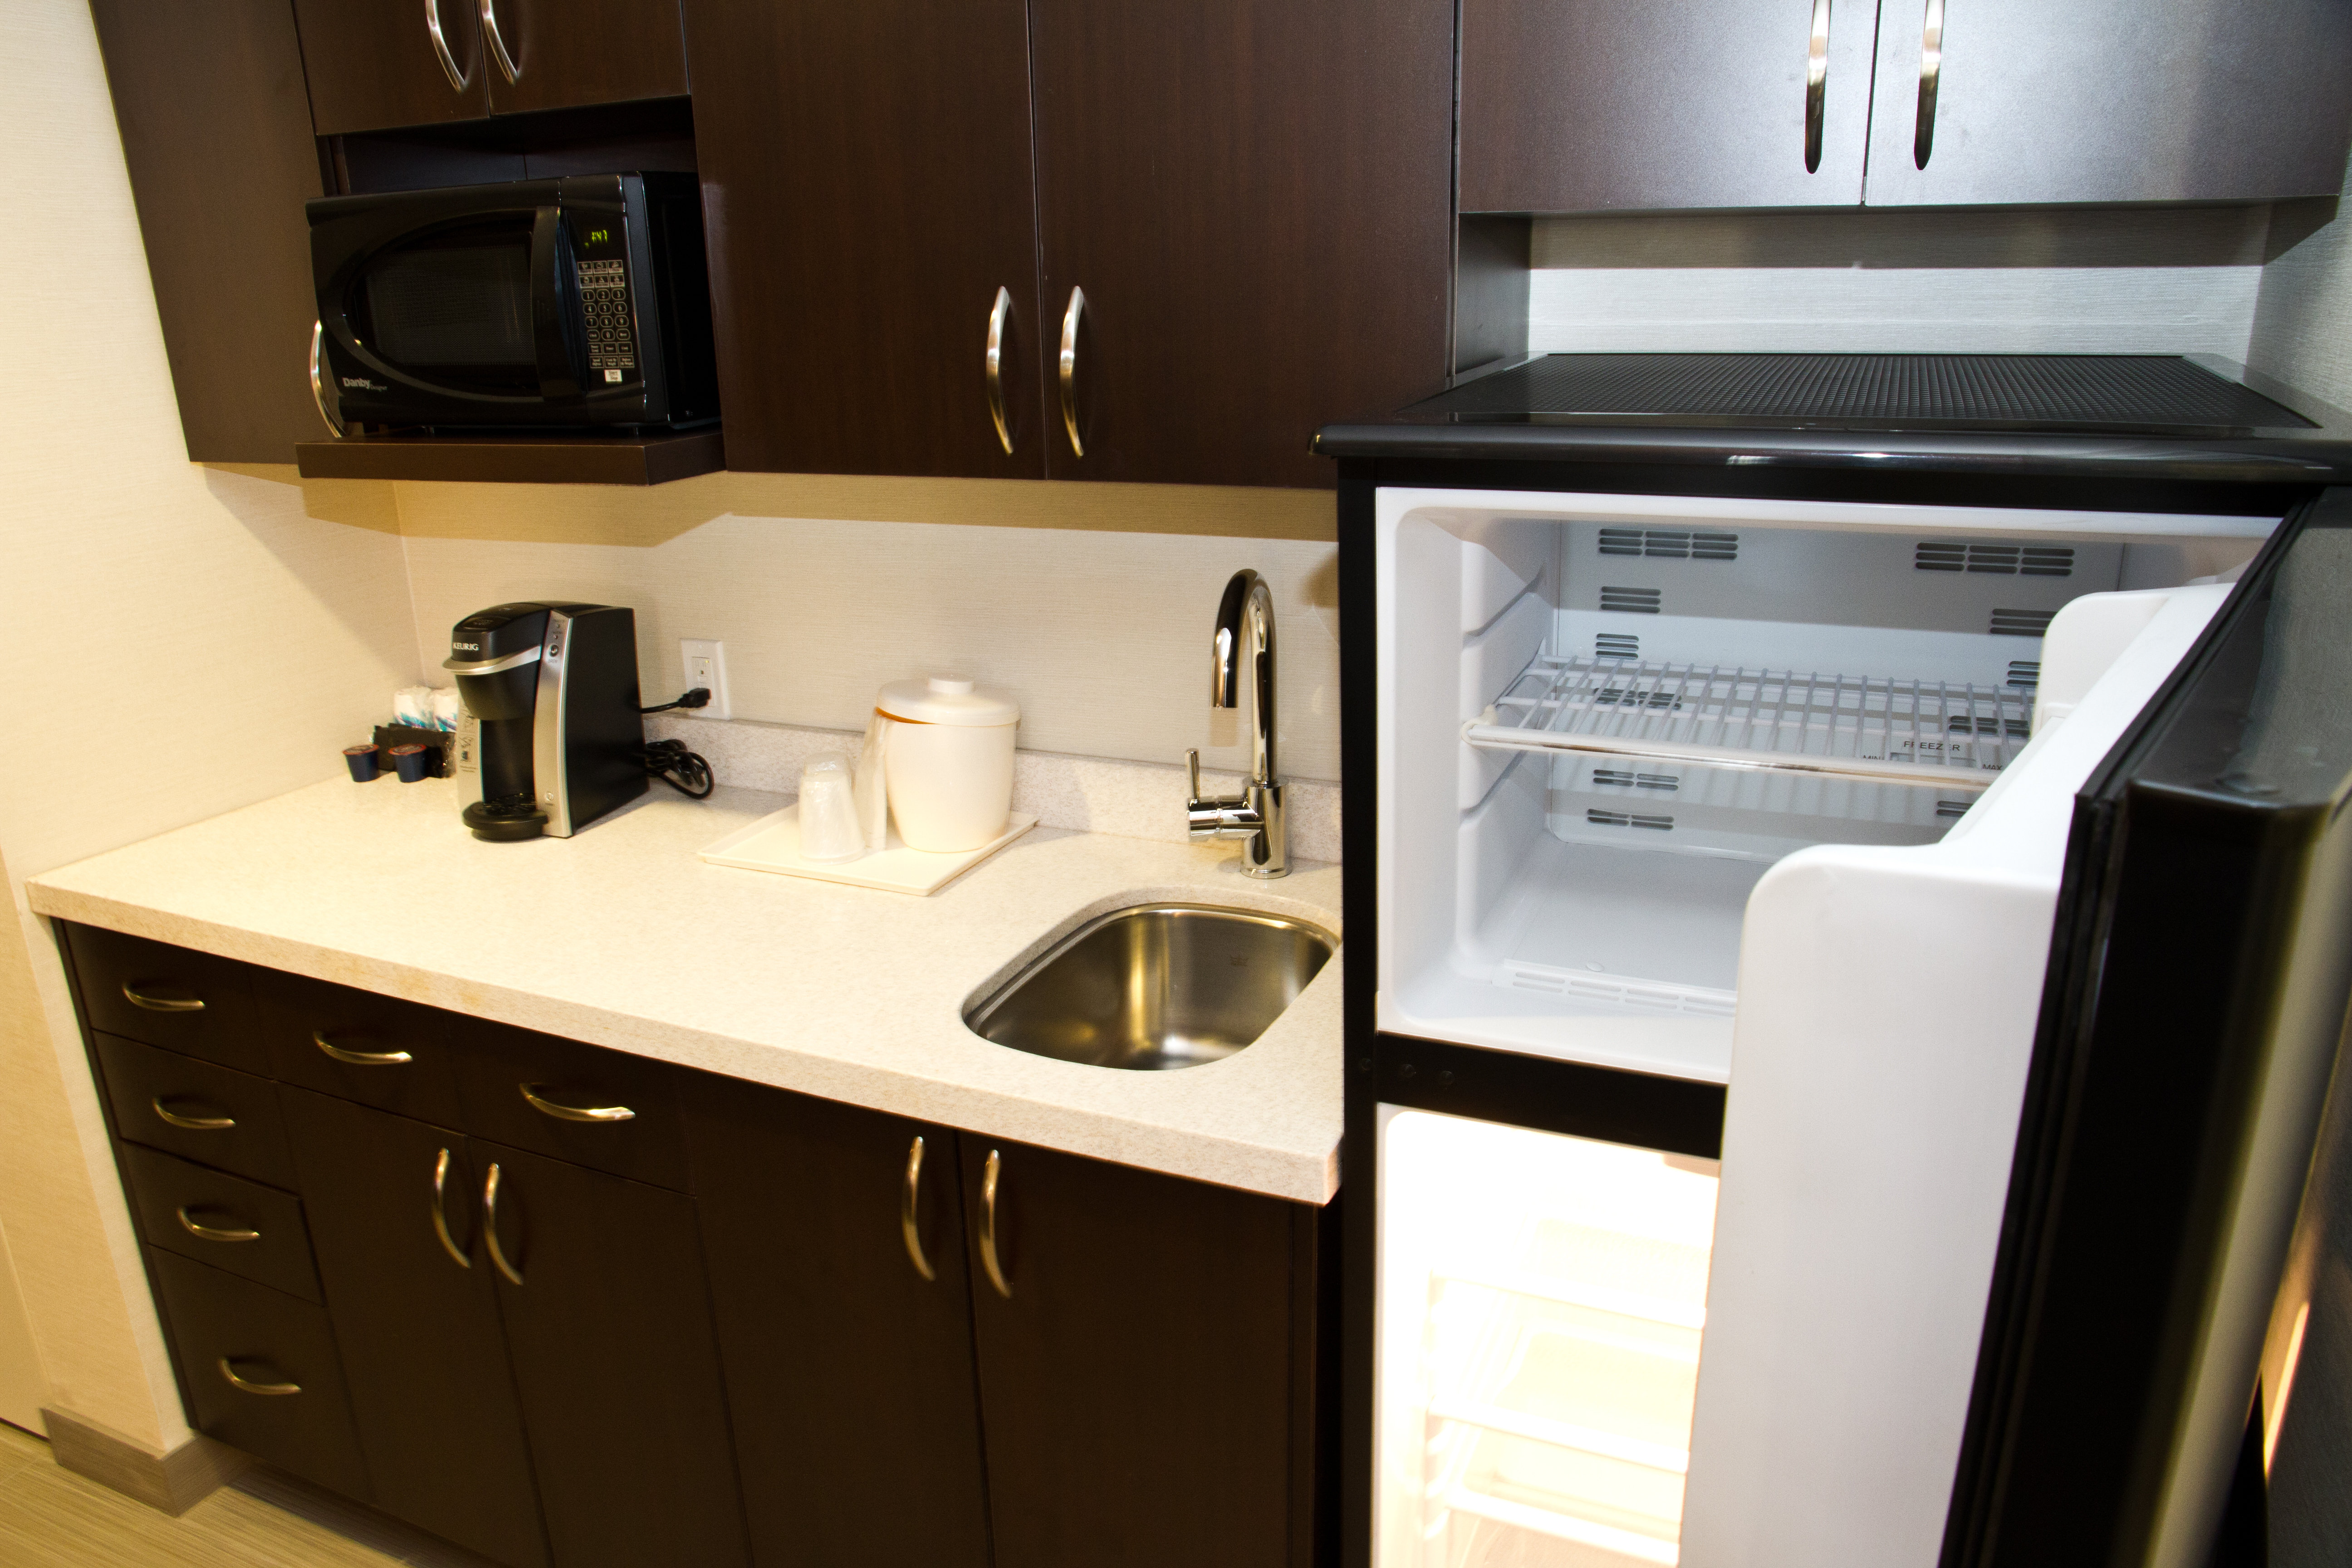 Keurig coffee maker and fridge available in all room